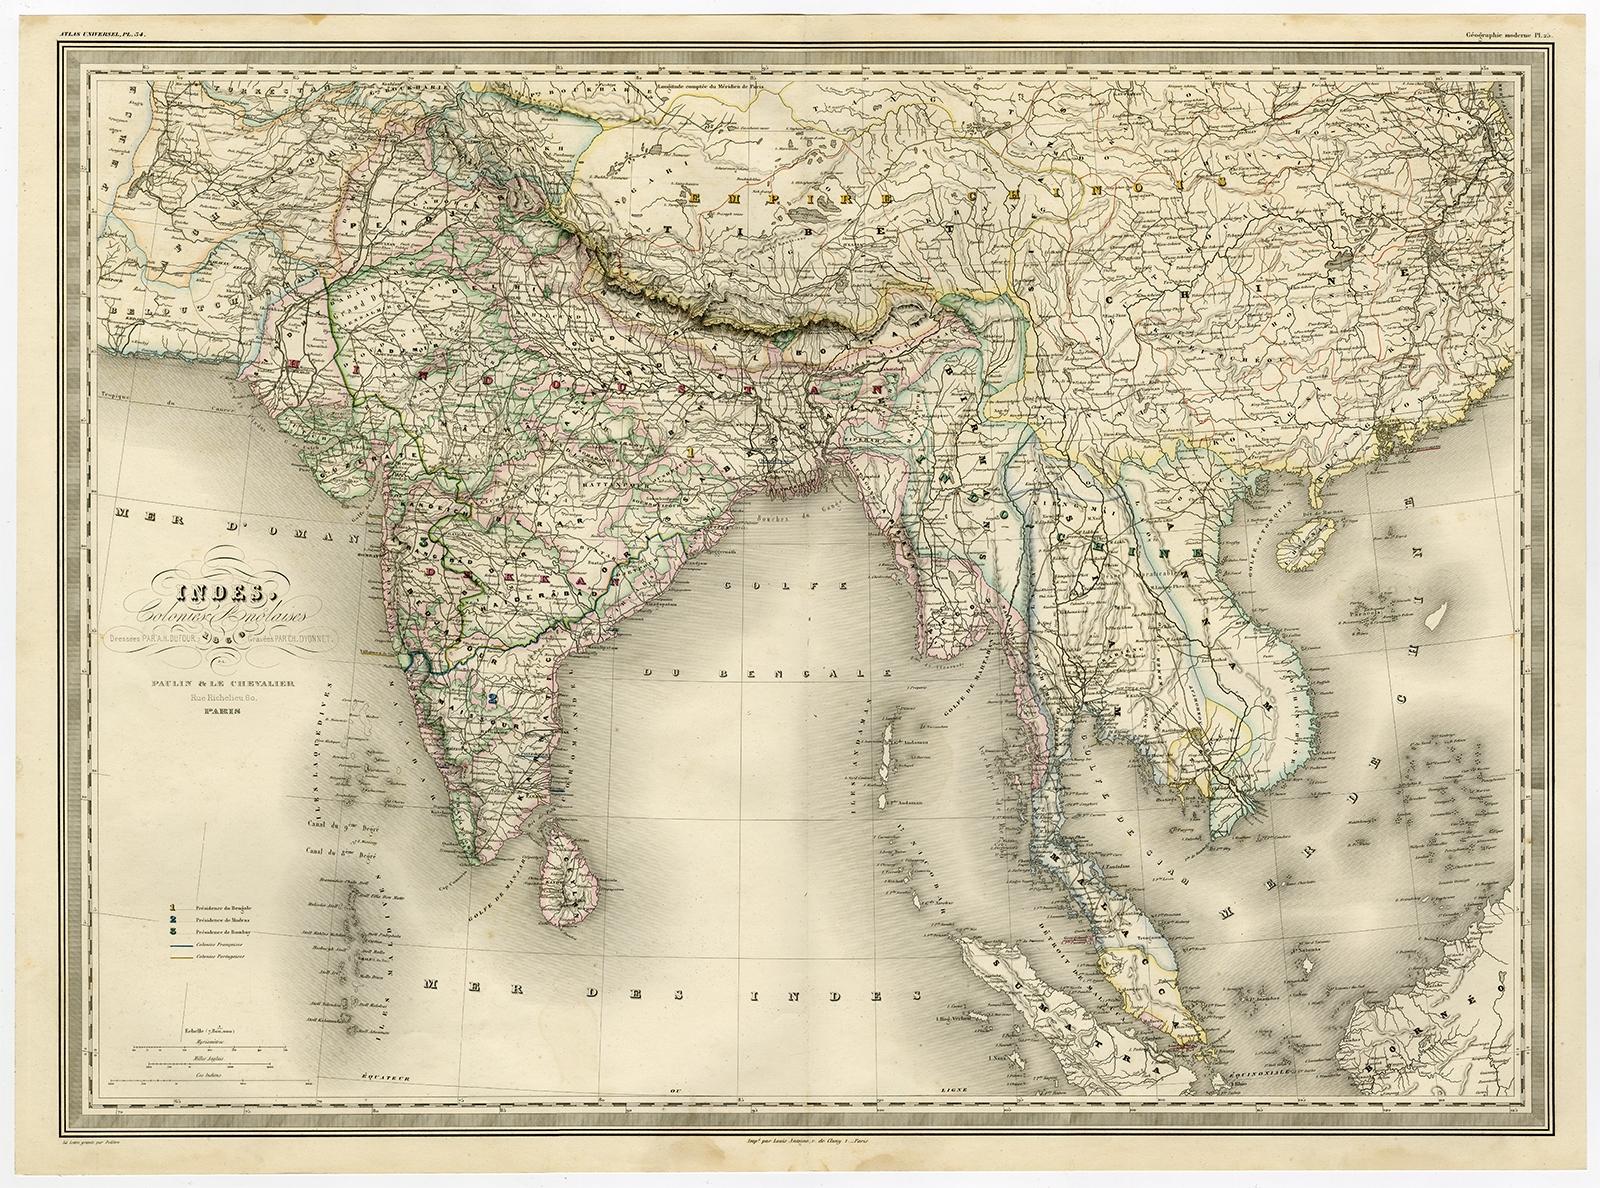 Antique map titled 'Indes, colonies Anglaises.' 

Large map of the East Indies, British Colonies. A superb, large-scale map of British India, the Chinese Empire, Indochina, the Malay Peninsula, and parts of Sumatra and Borneo. This large original